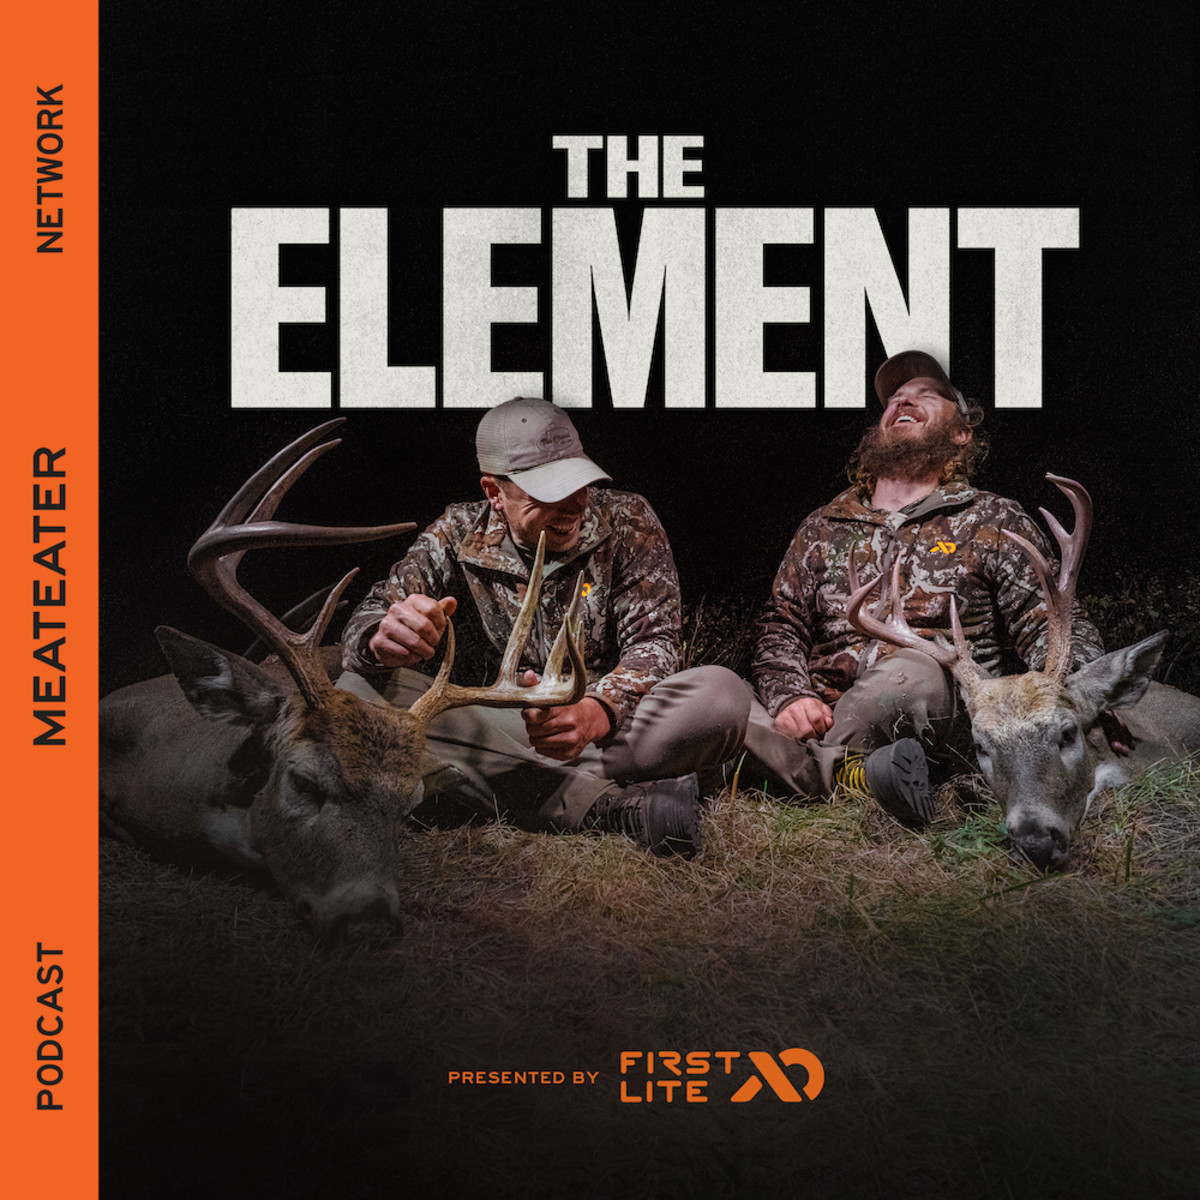 E256: DOUBLE UP!! Nebraska Hunt (Struggling to find Deer, Water Tanks, Pizza Party, Eric’s First Buck Journey)